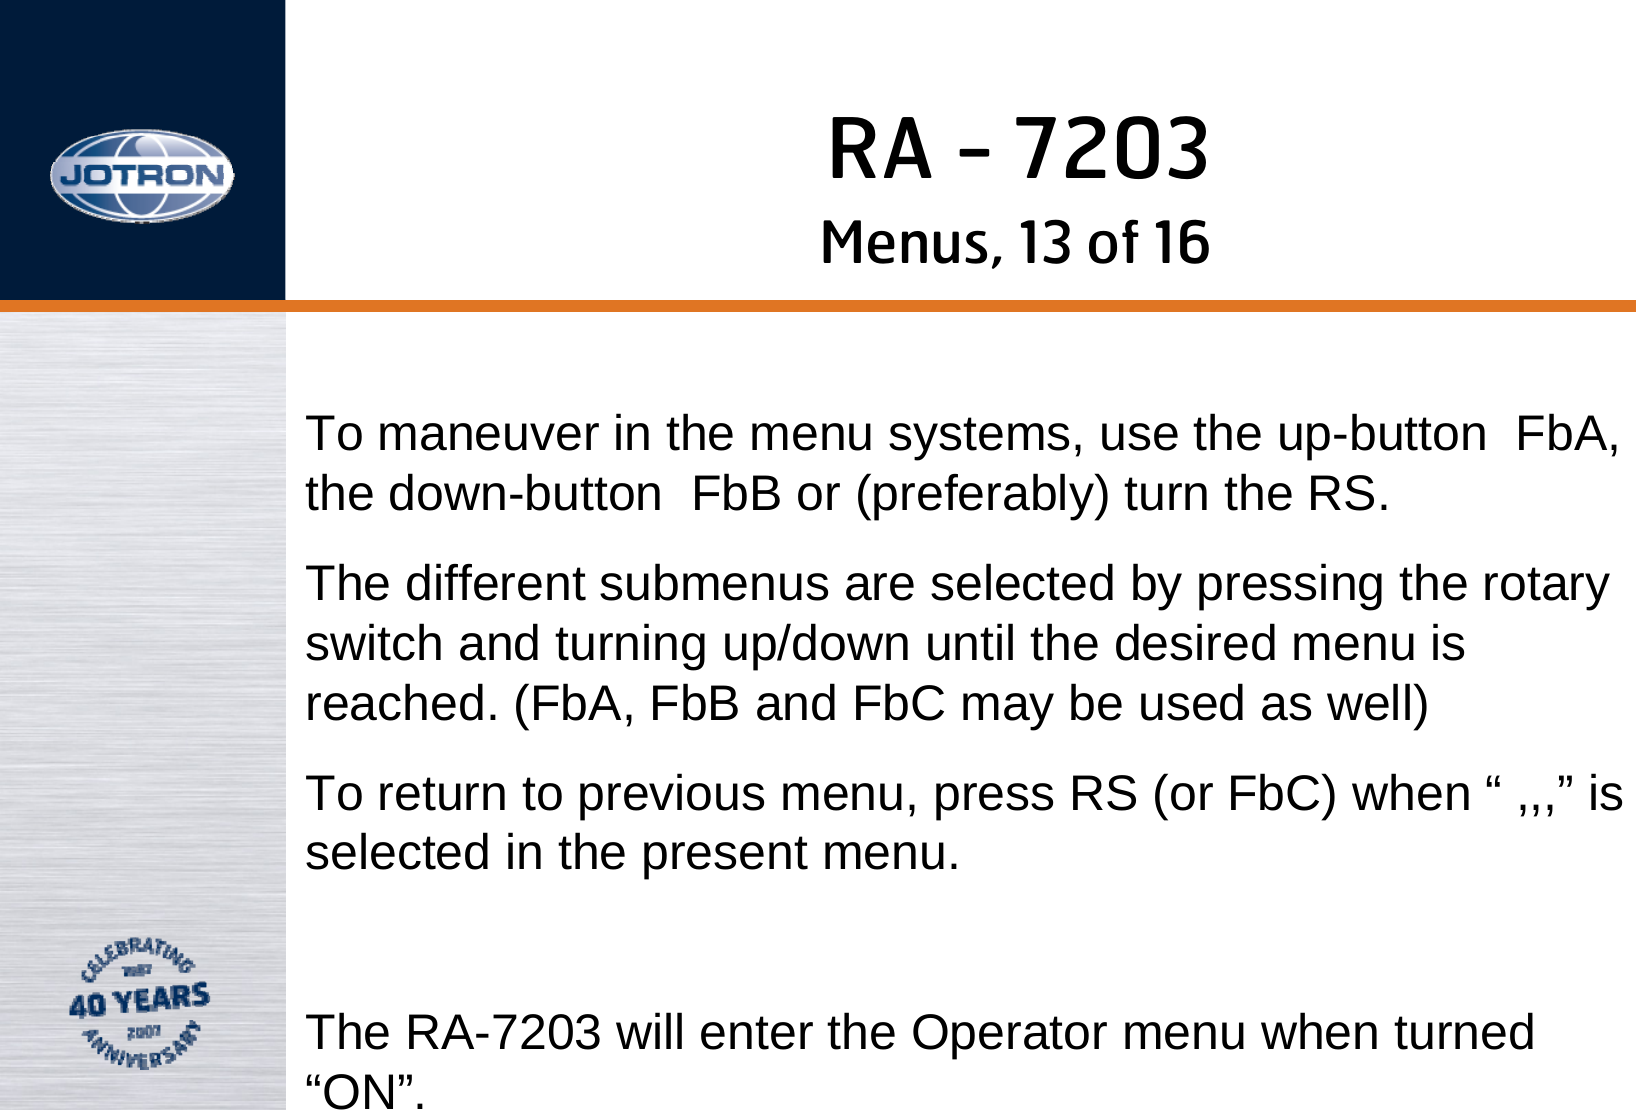 RA - 7203Menus, 13 of 16To maneuver in the menu systems, use the up-button FbA, the down-button FbB or (preferably) turn the RS. The different submenus are selected by pressing the rotary switch and turning up/down until the desired menu is reached. (FbA, FbB and FbC may be used as well)To return to previous menu, press RS (or FbC) when “ ,,,” is selected in the present menu.The RA-7203 will enter the Operator menu when turned “ON”.